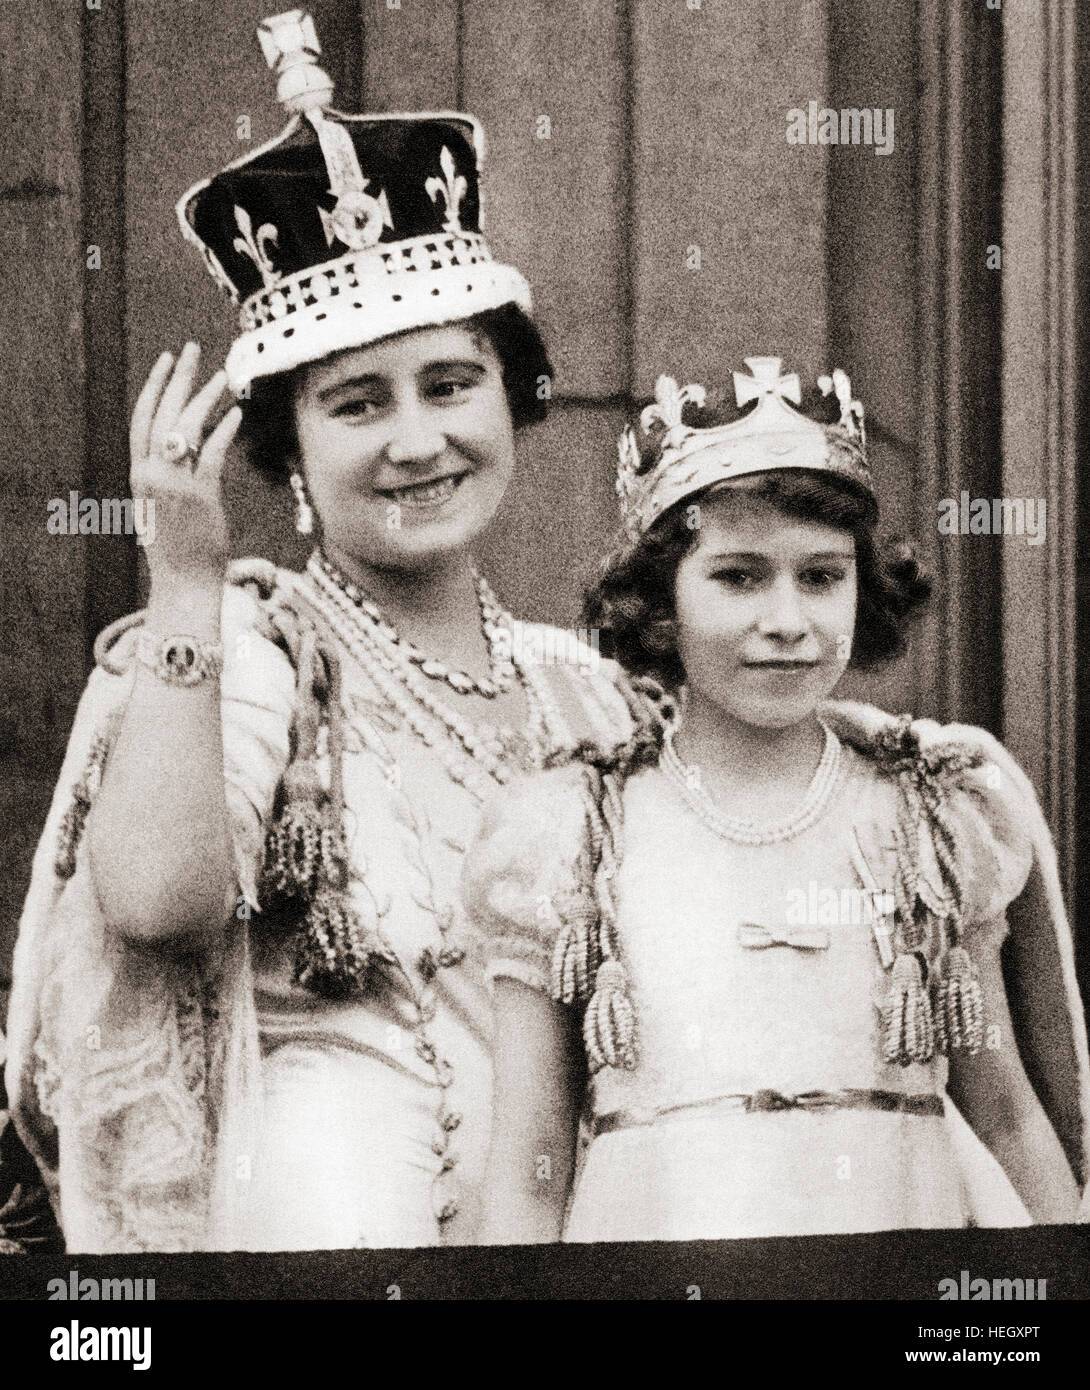 Queen Elizabeth on the day of her coronation in 1936 with her daughter Princess Elizabeth on the balcony of Buckingham Palace, London, England.  Elizabeth Angela Marguerite Bowes-Lyon, 1900 –2002. Princess Elizabeth, future Queen Elizabeth II.  Elizabeth II,  1926 - 2022.  Queen of the United Kingdom, Canada, Australia and New Zealand. Stock Photo